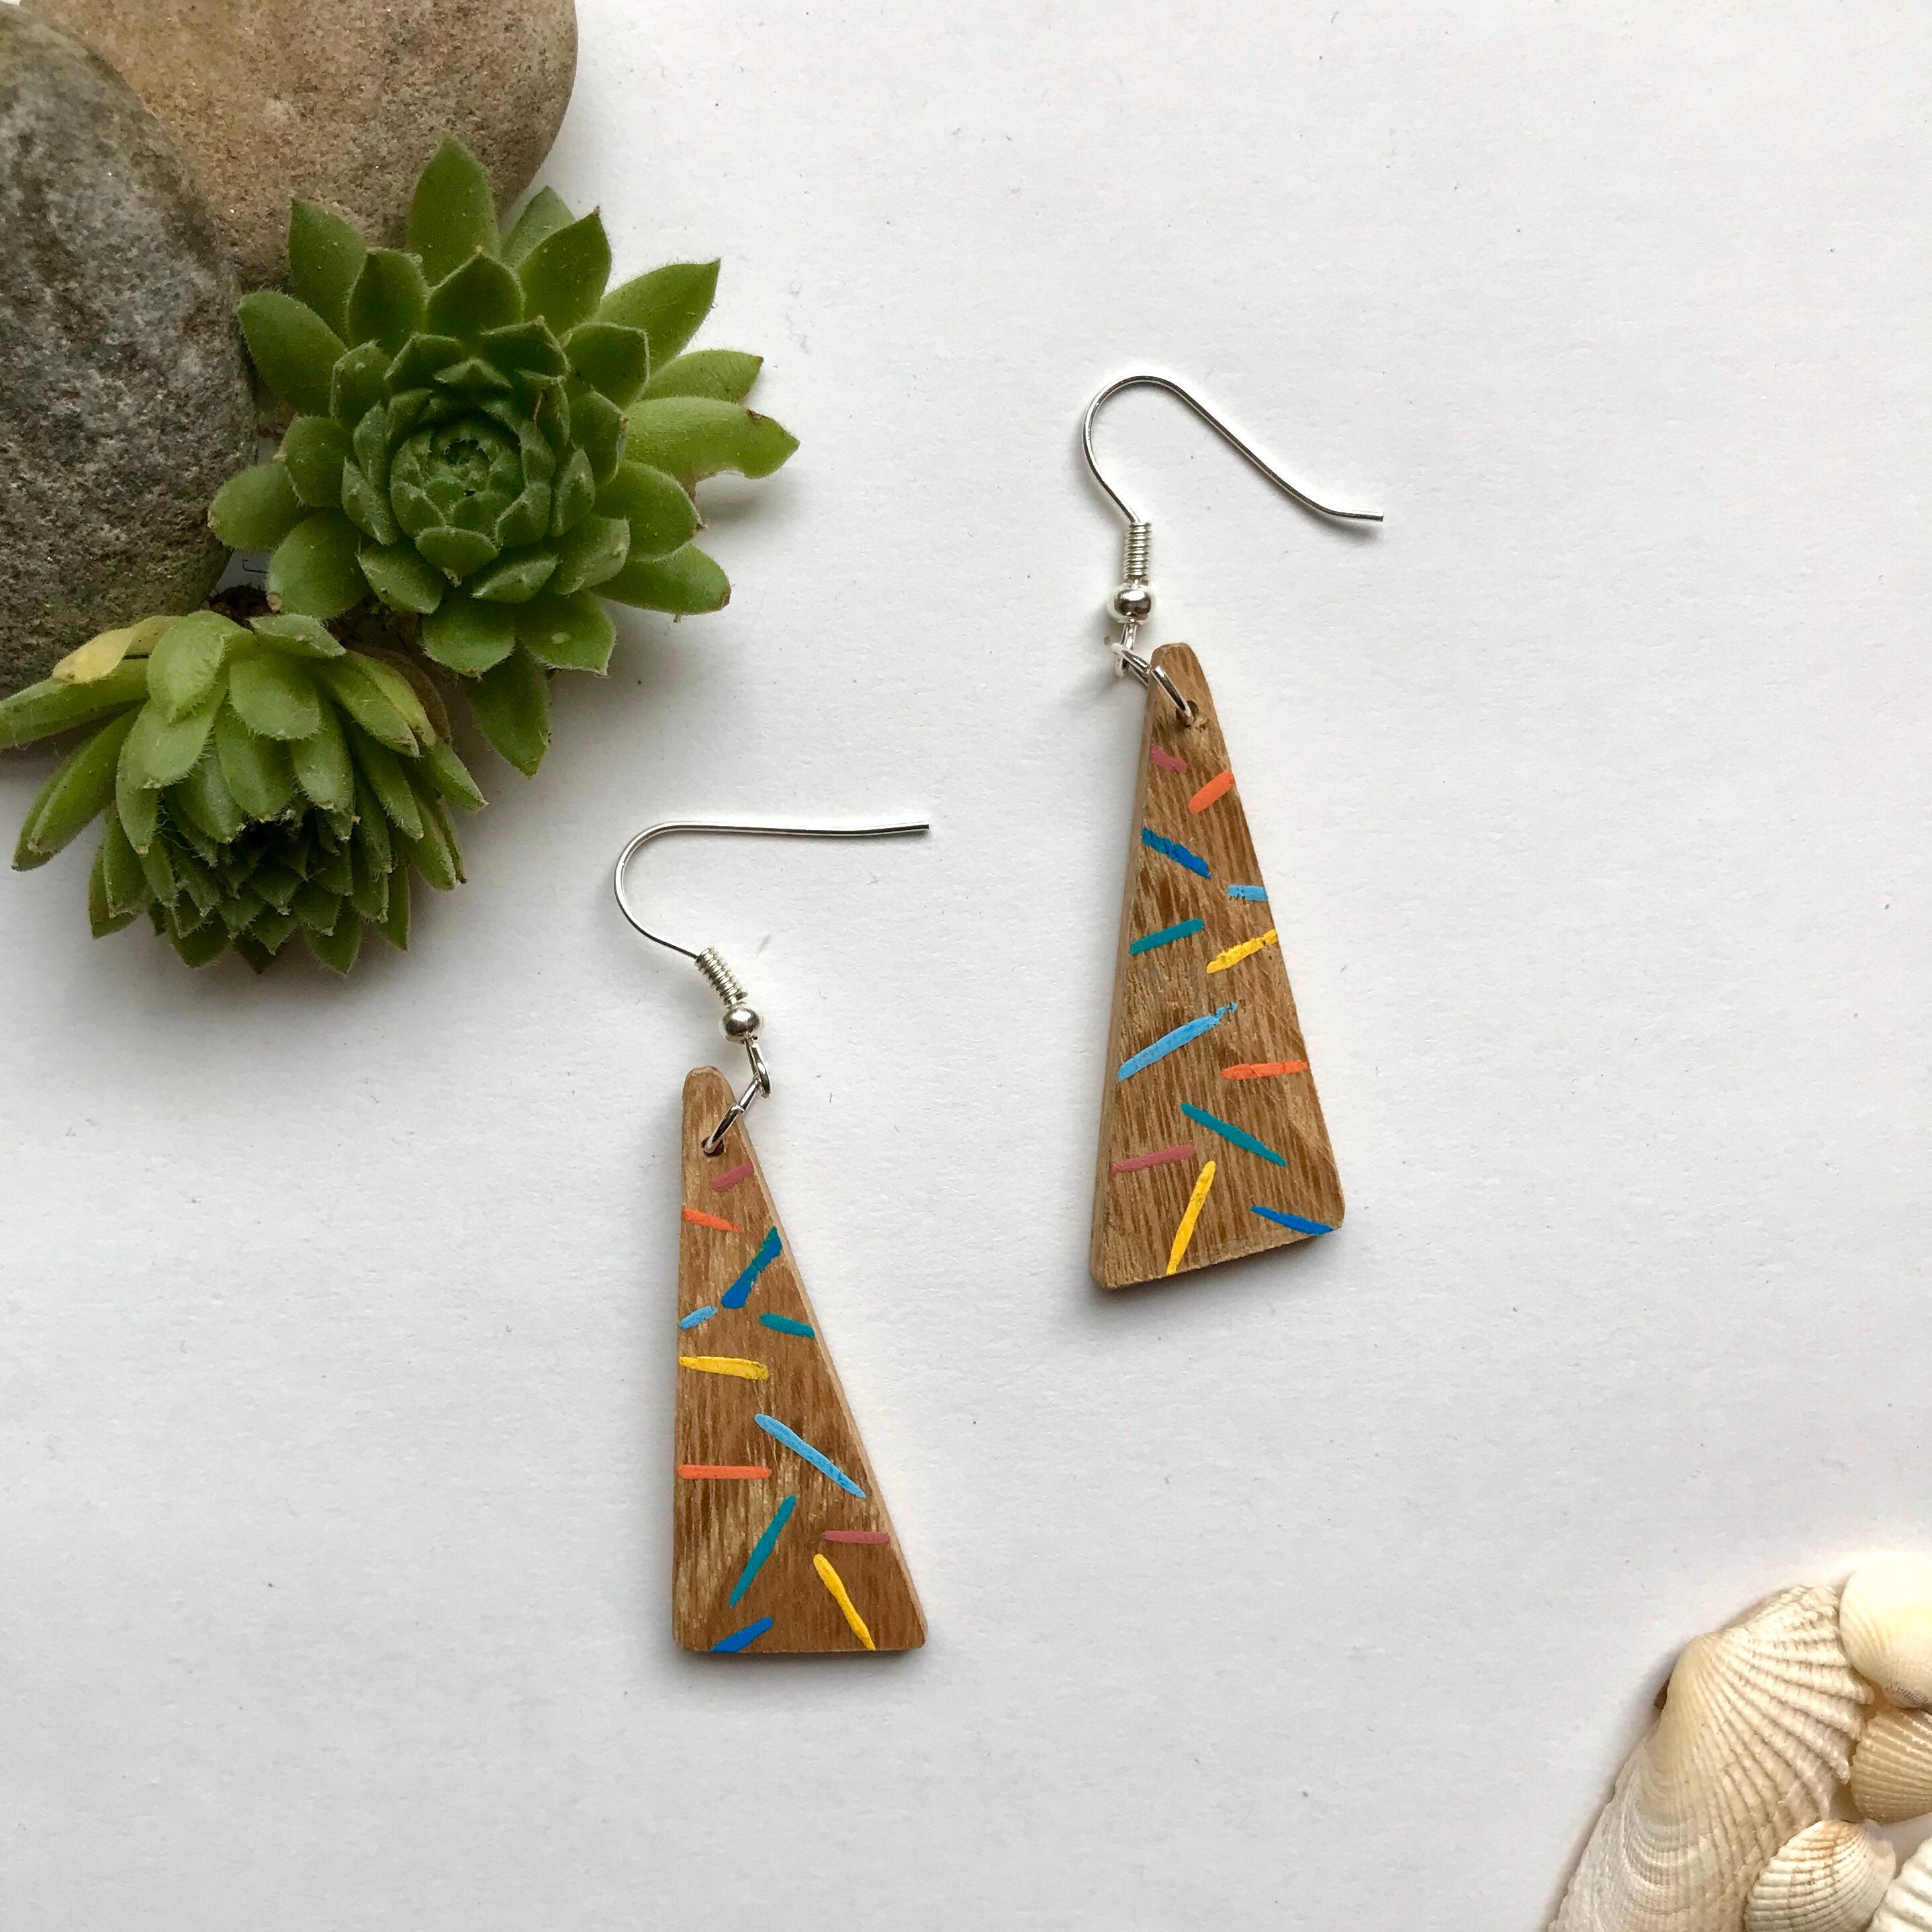 Handmade Recycled Triangle Wooden Oak Eco Earrings, Hand Painted with A Multicoloured Pattern